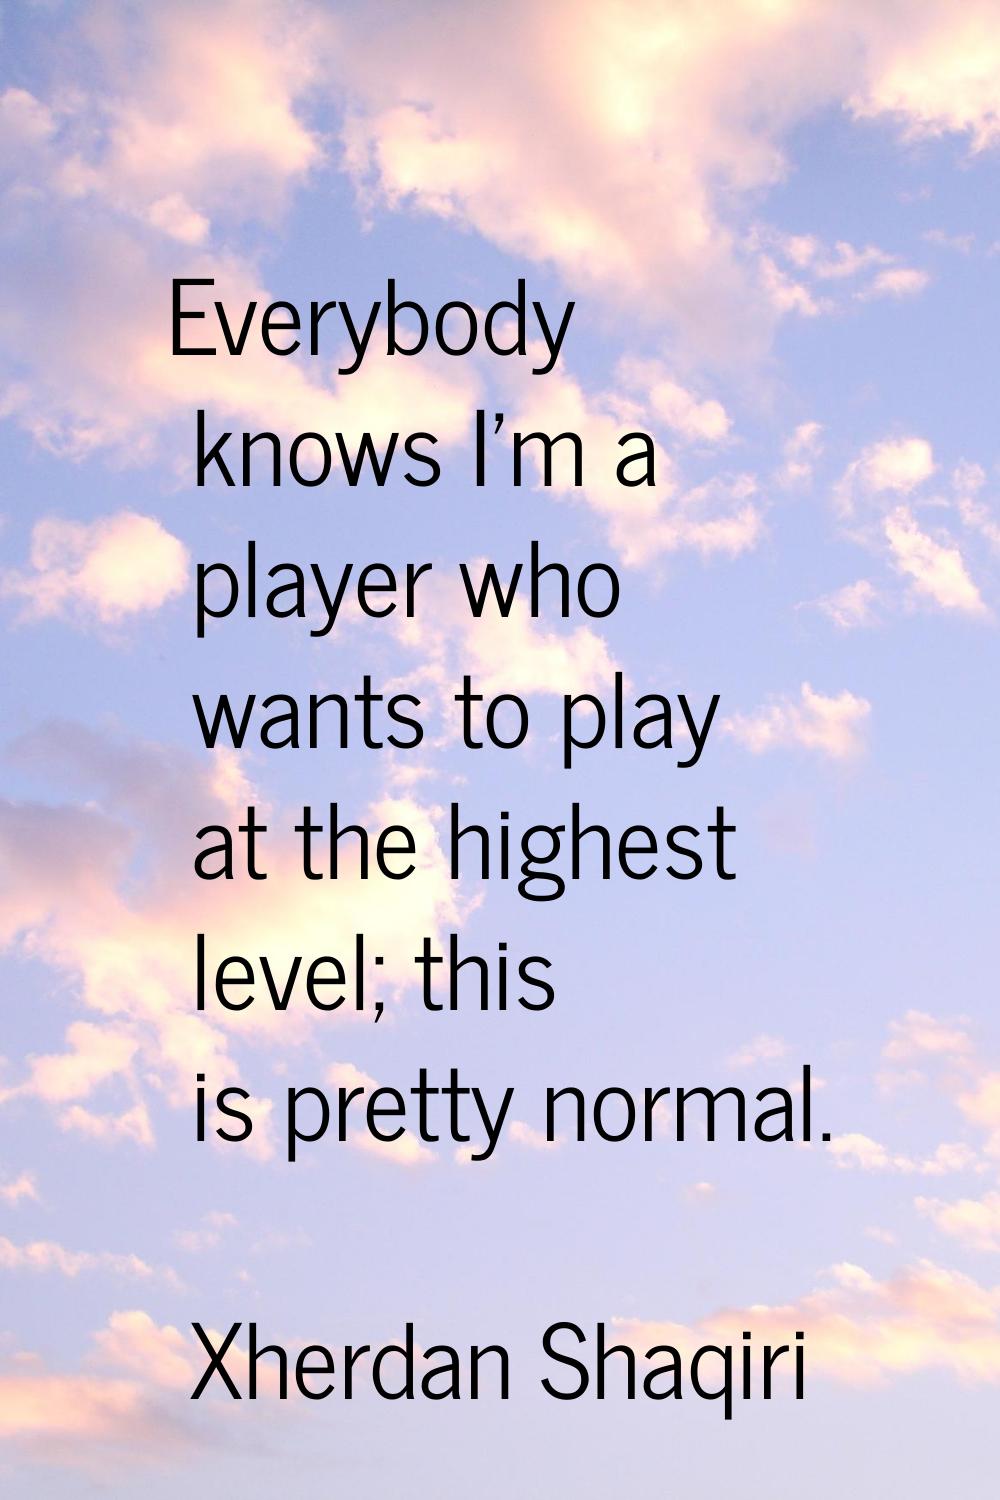 Everybody knows I'm a player who wants to play at the highest level; this is pretty normal.